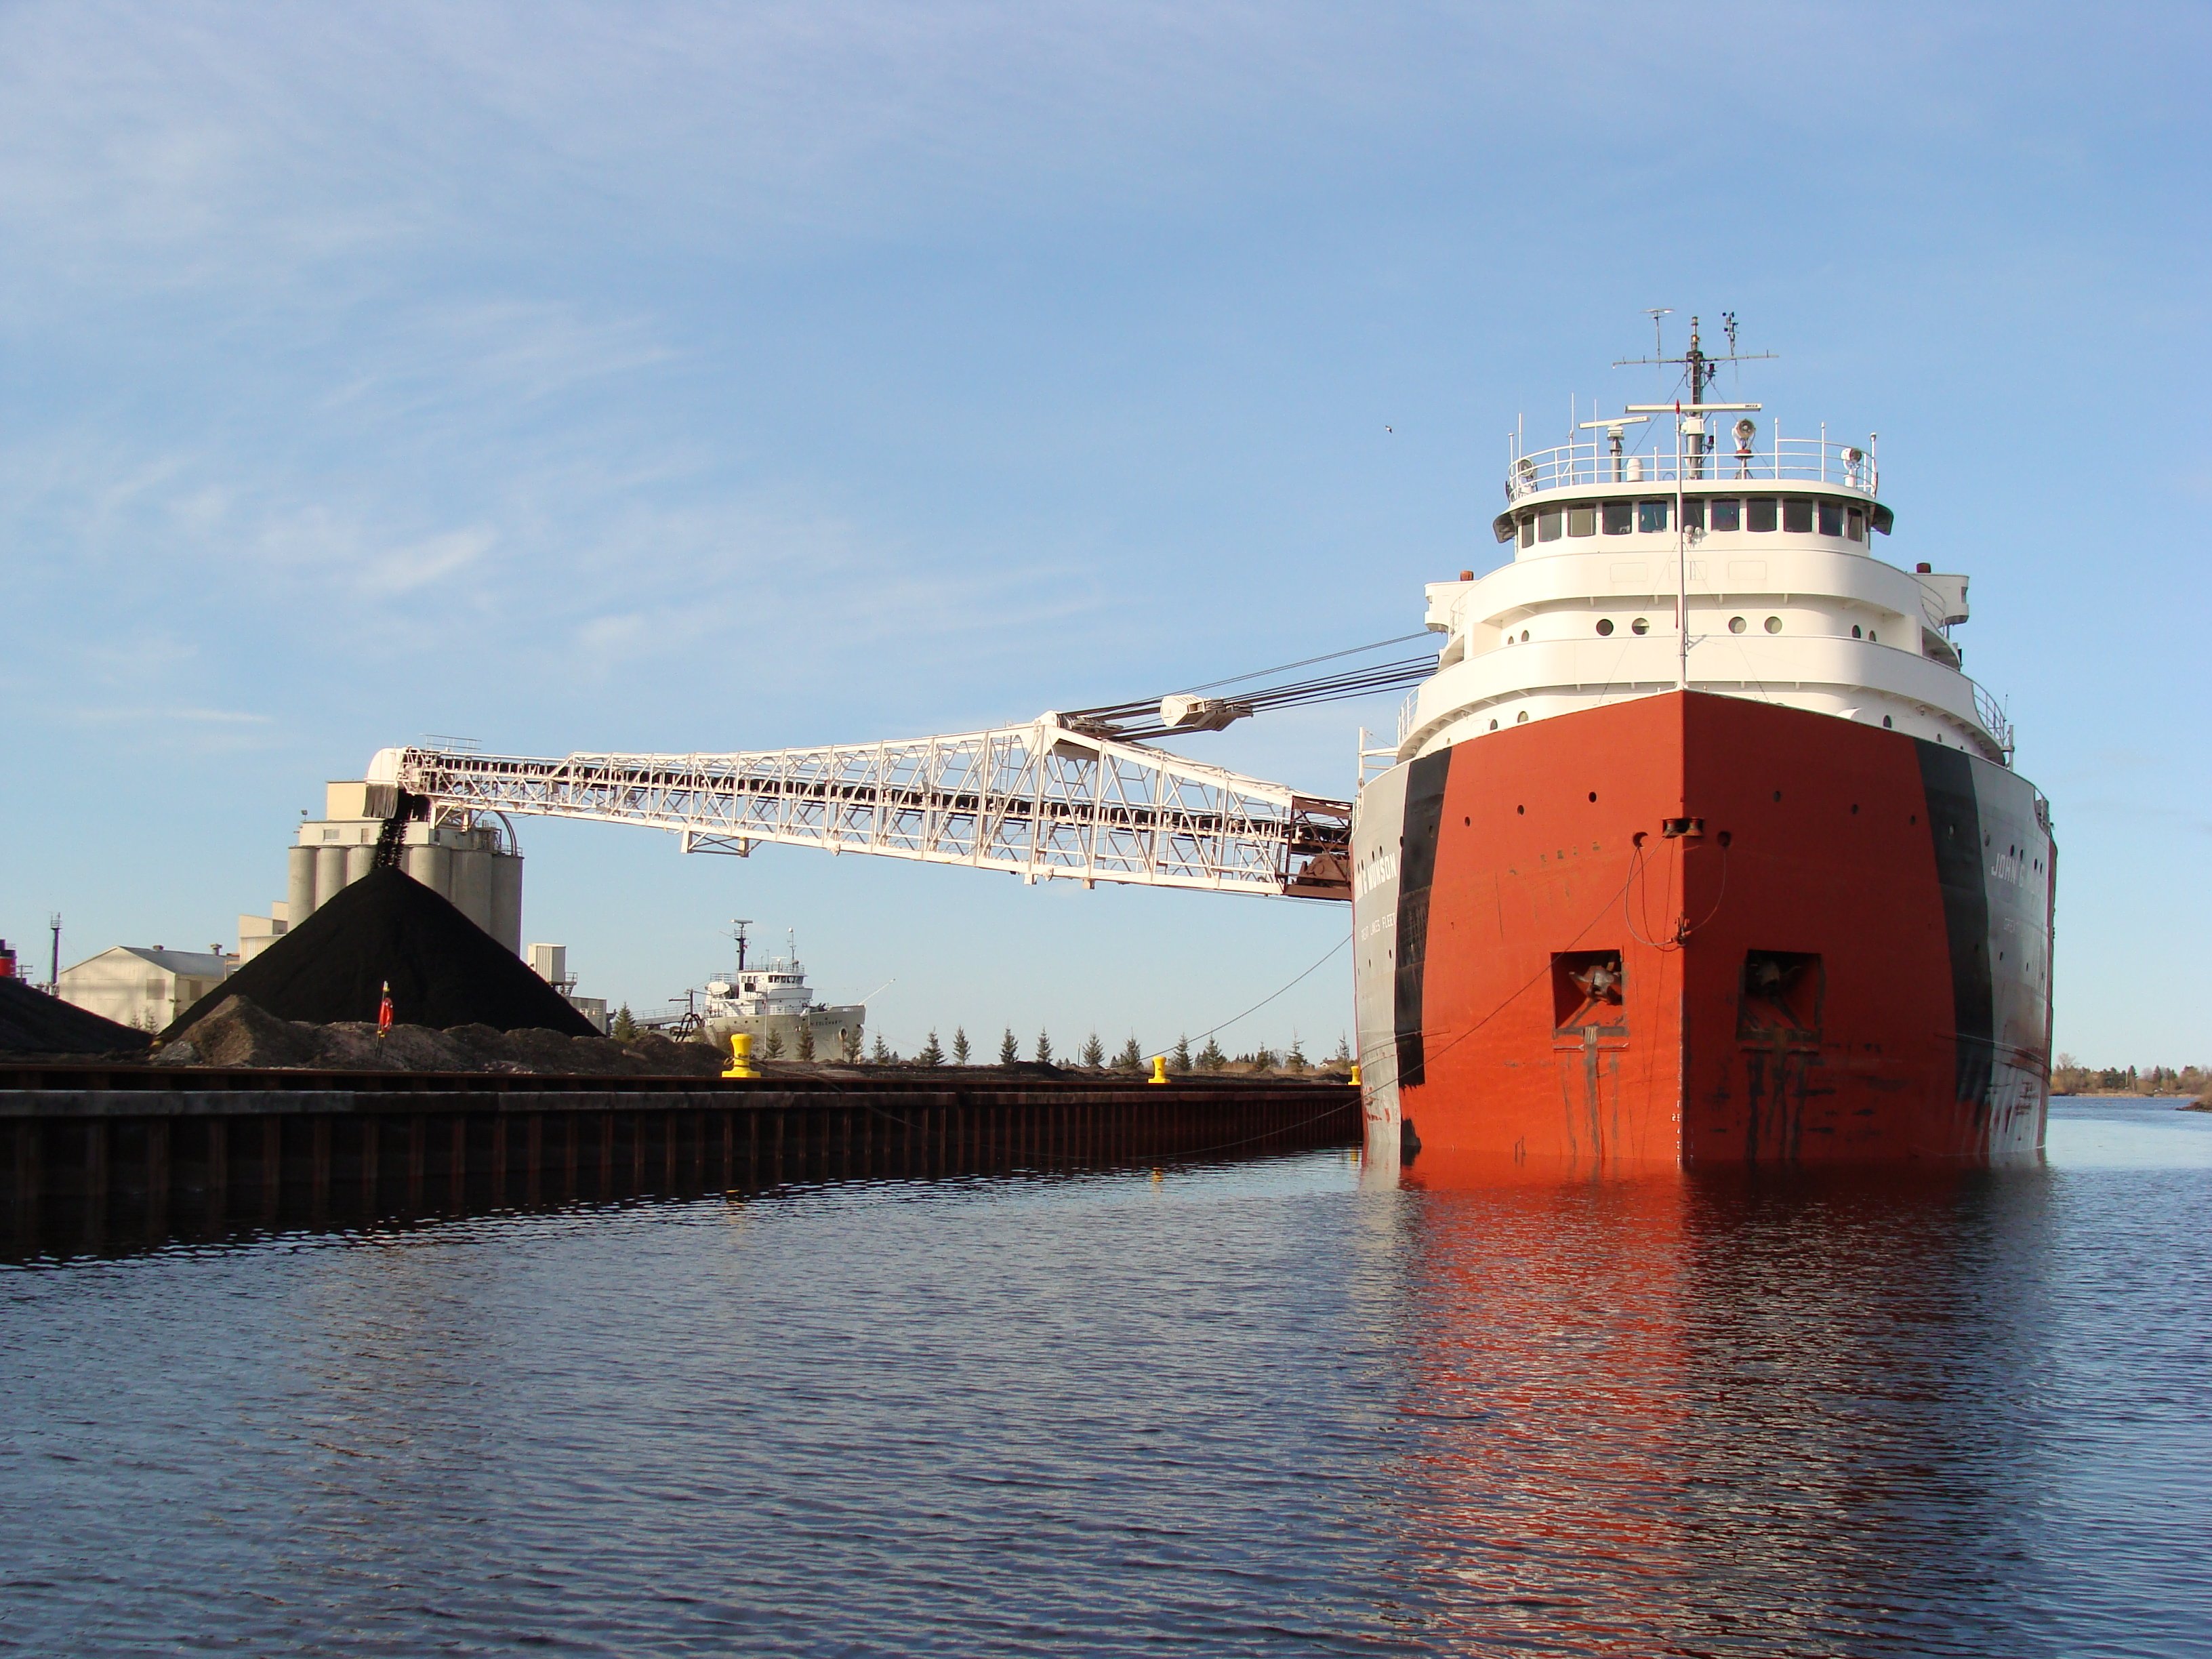 The self-dischaging dry bulk carrier John G. Munson unloads coal at a terminal in Superior, Wisconsin, on Lake Superior.